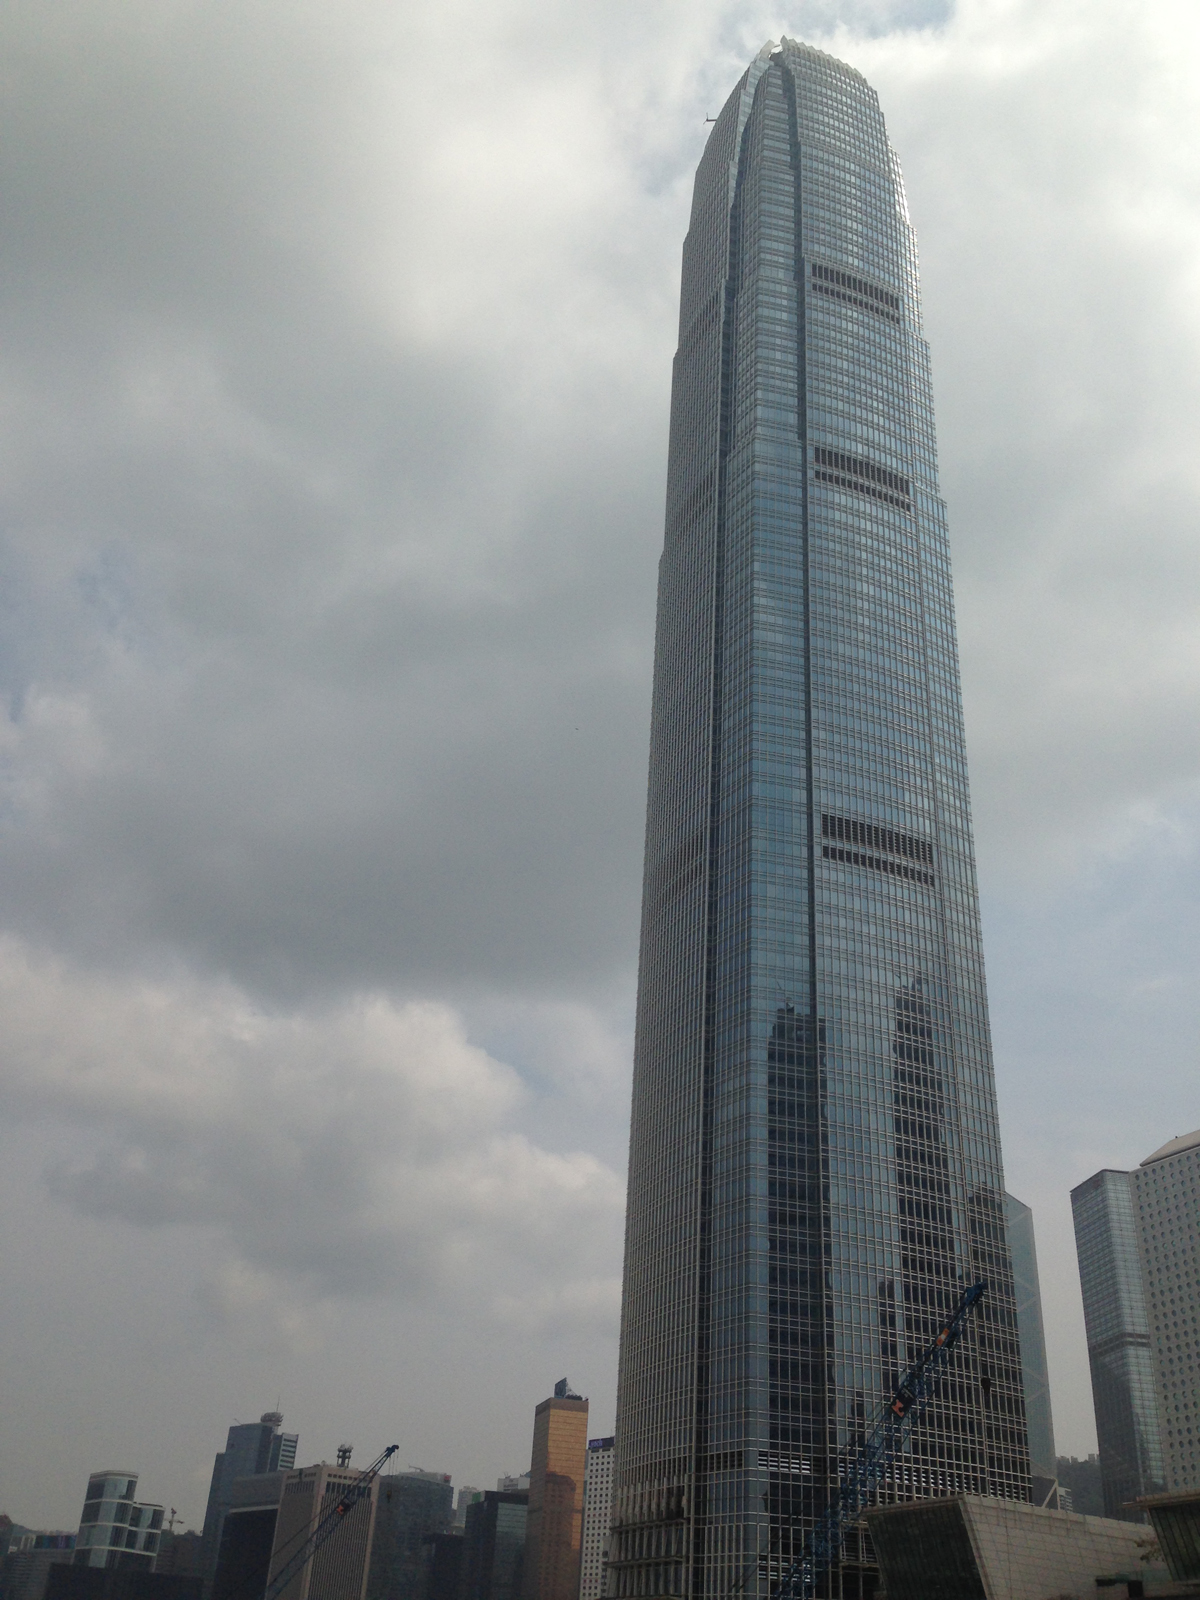 This building was so tall that I only managed to capture it using panoramic mode.